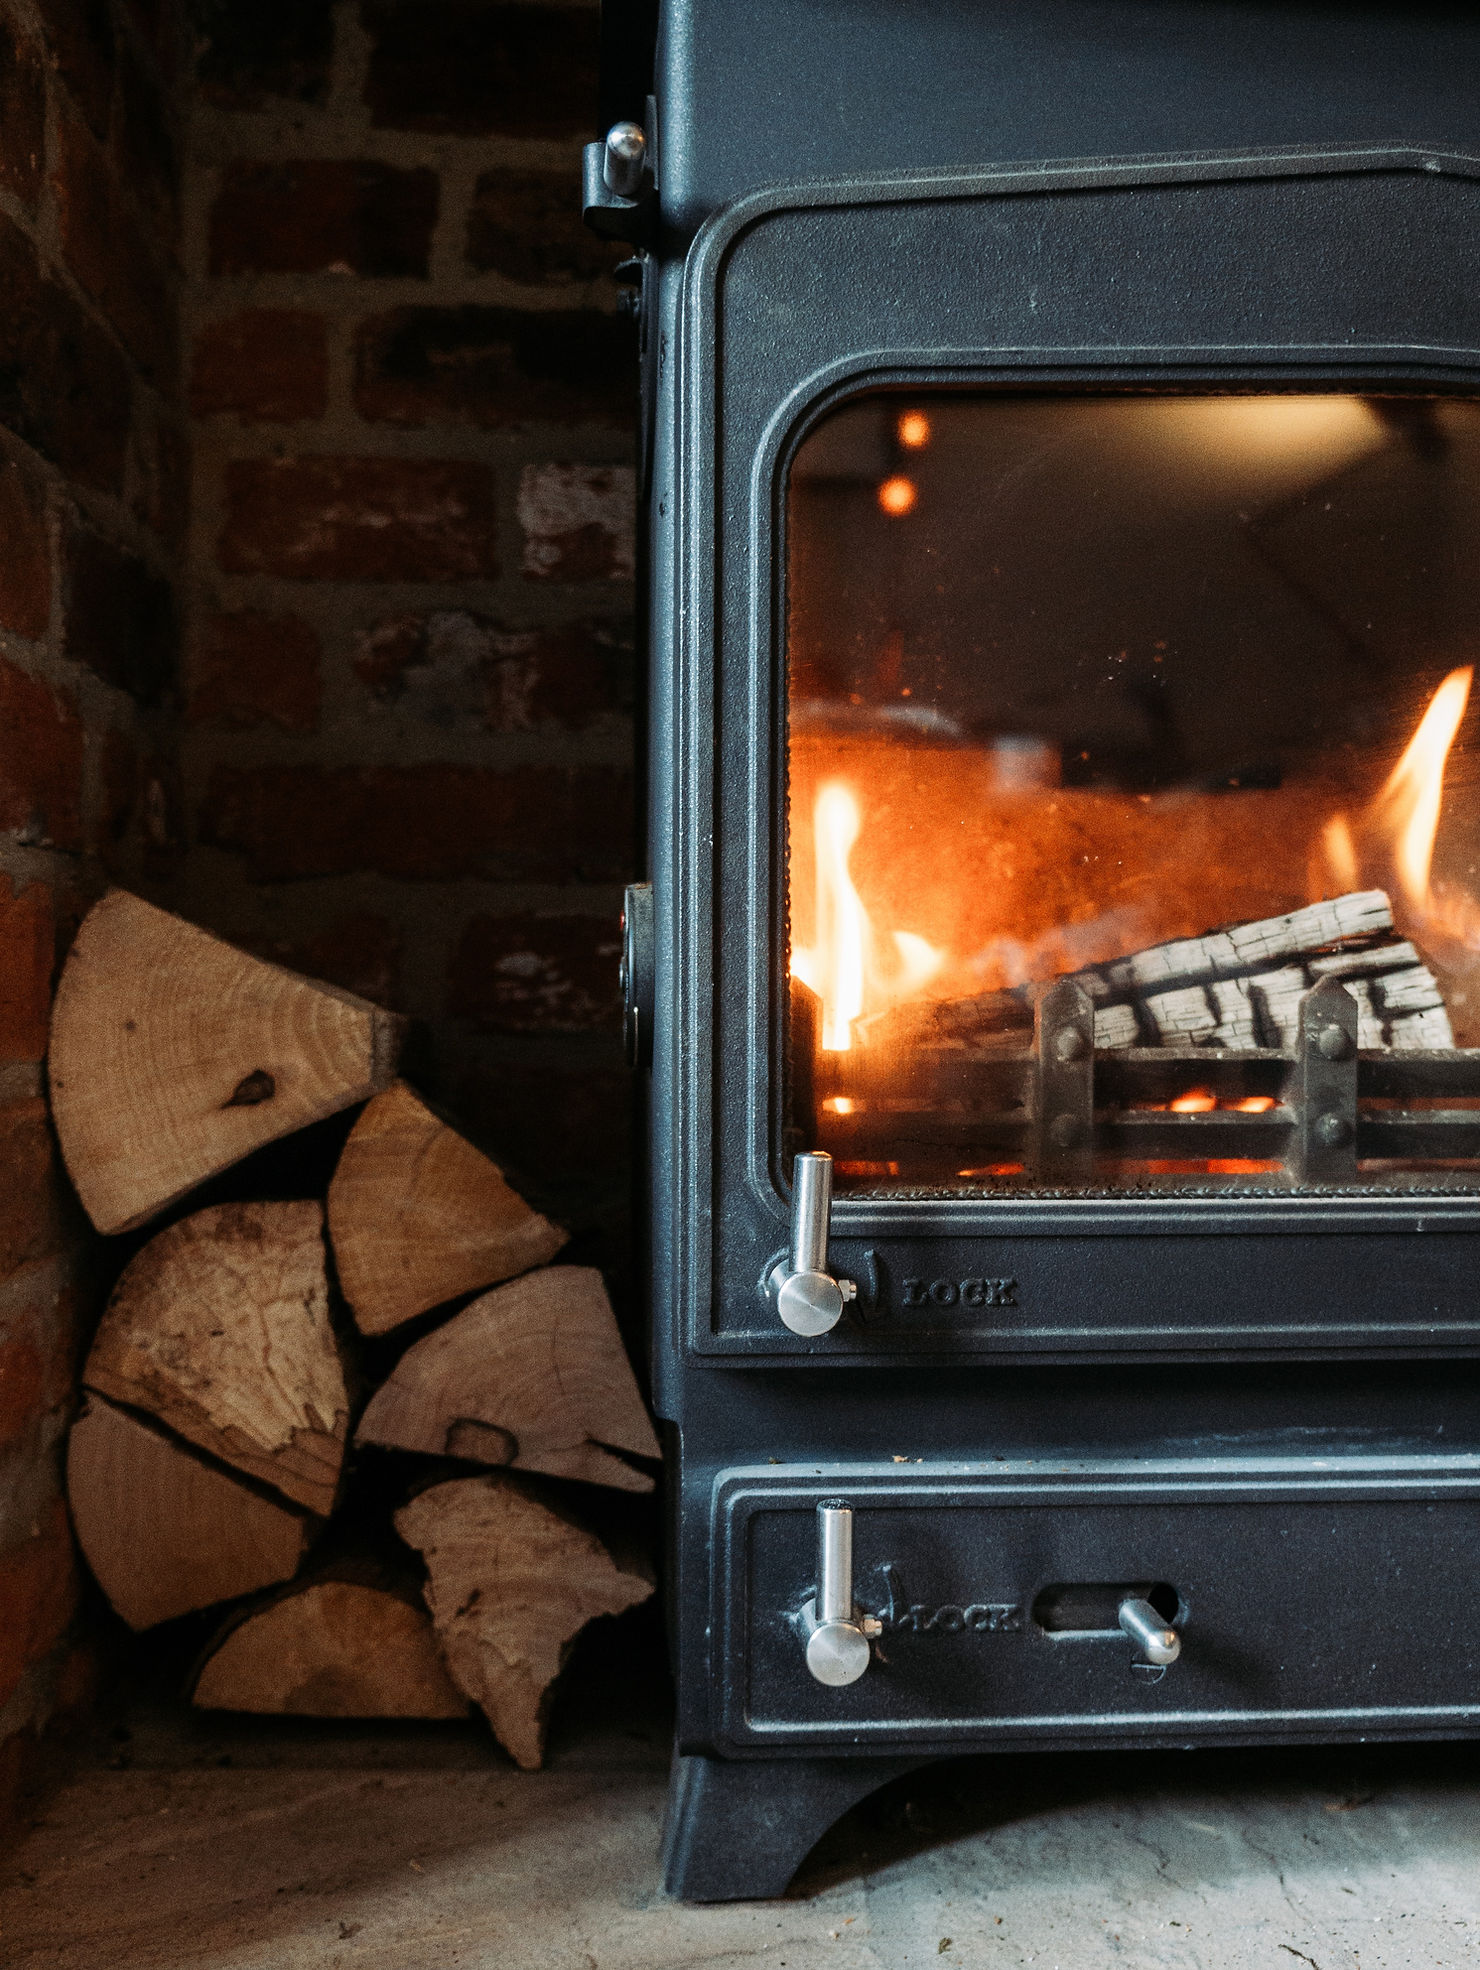 Problems With Neighbour’s Wood Burner (Here is what to do)